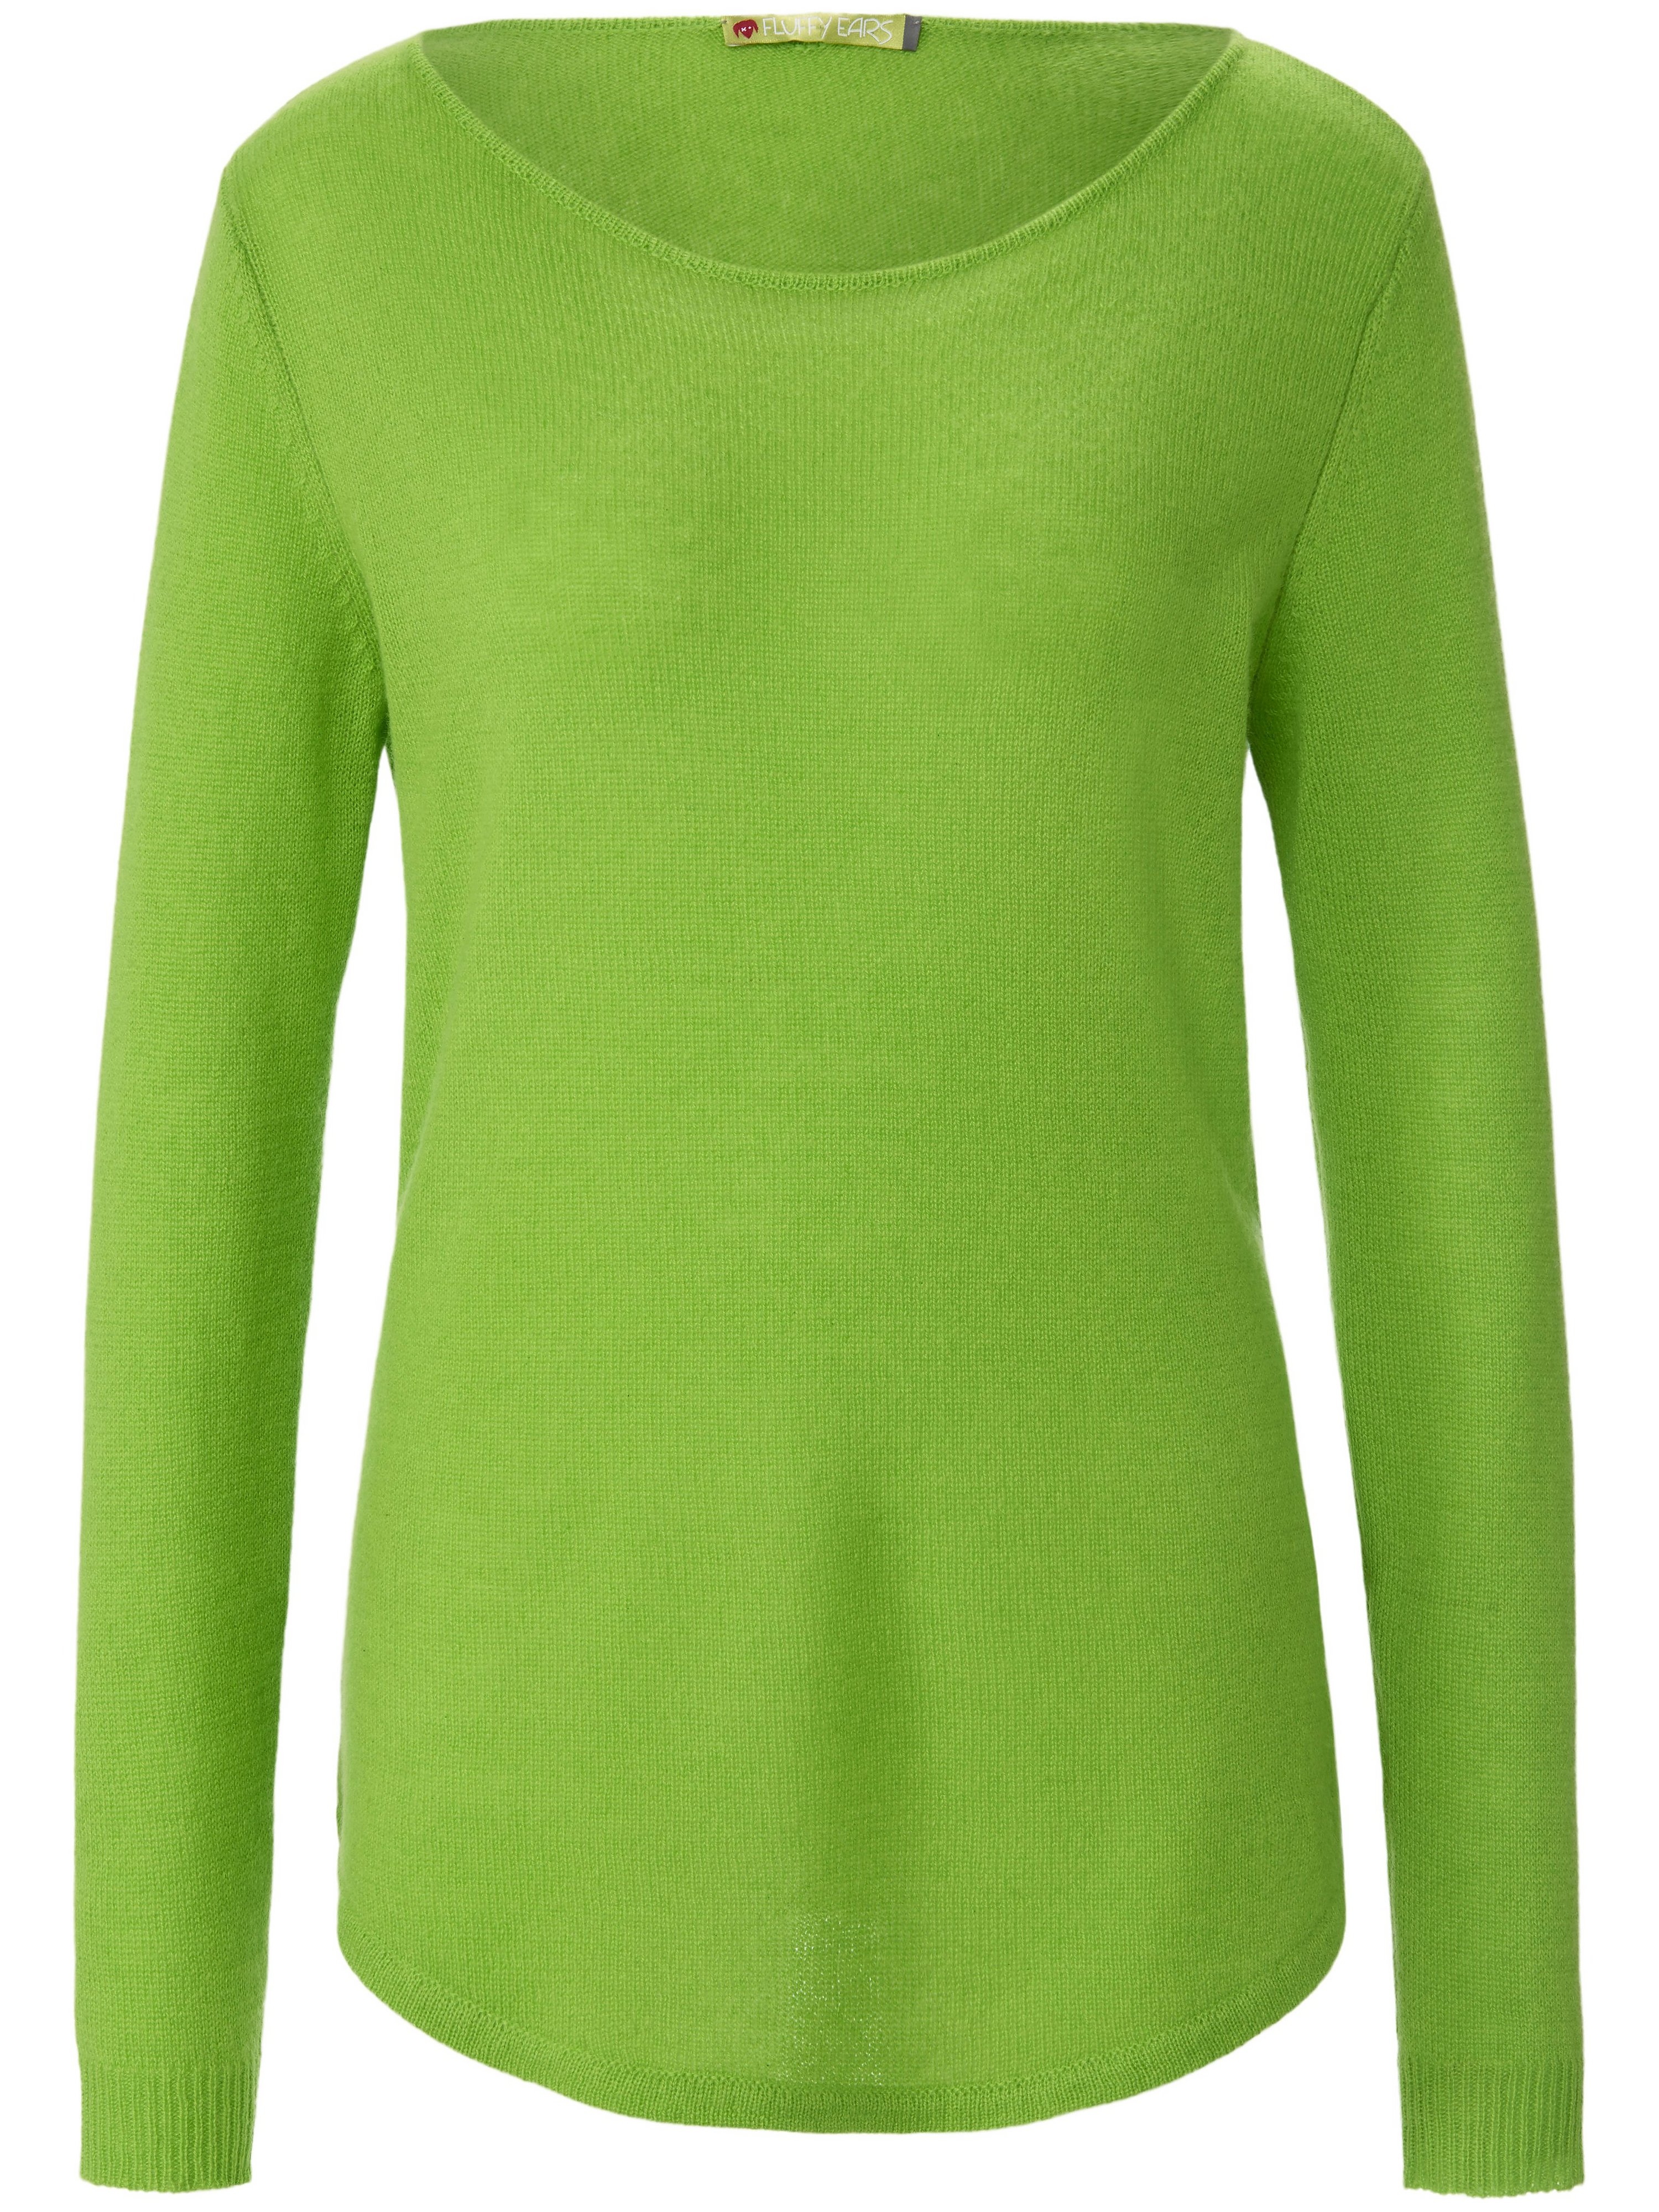 Le pull 100% cachemire  FLUFFY EARS vert taille 48